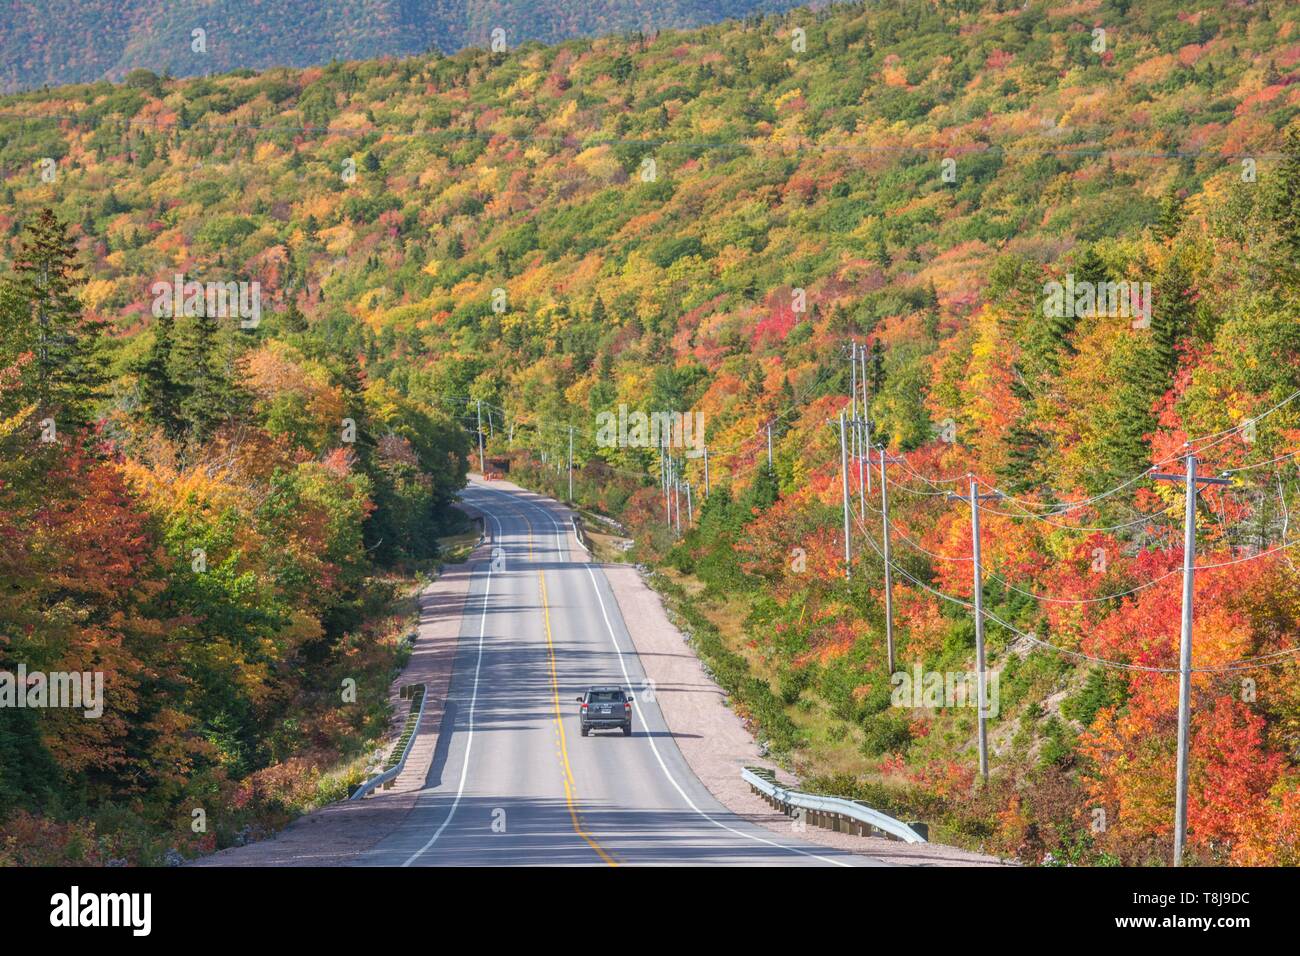 Canada, Nova Scotia, Cabot Trail, Neils Harbour, Cape Breton Highlands National Park, Highway 6 in autunno Foto Stock